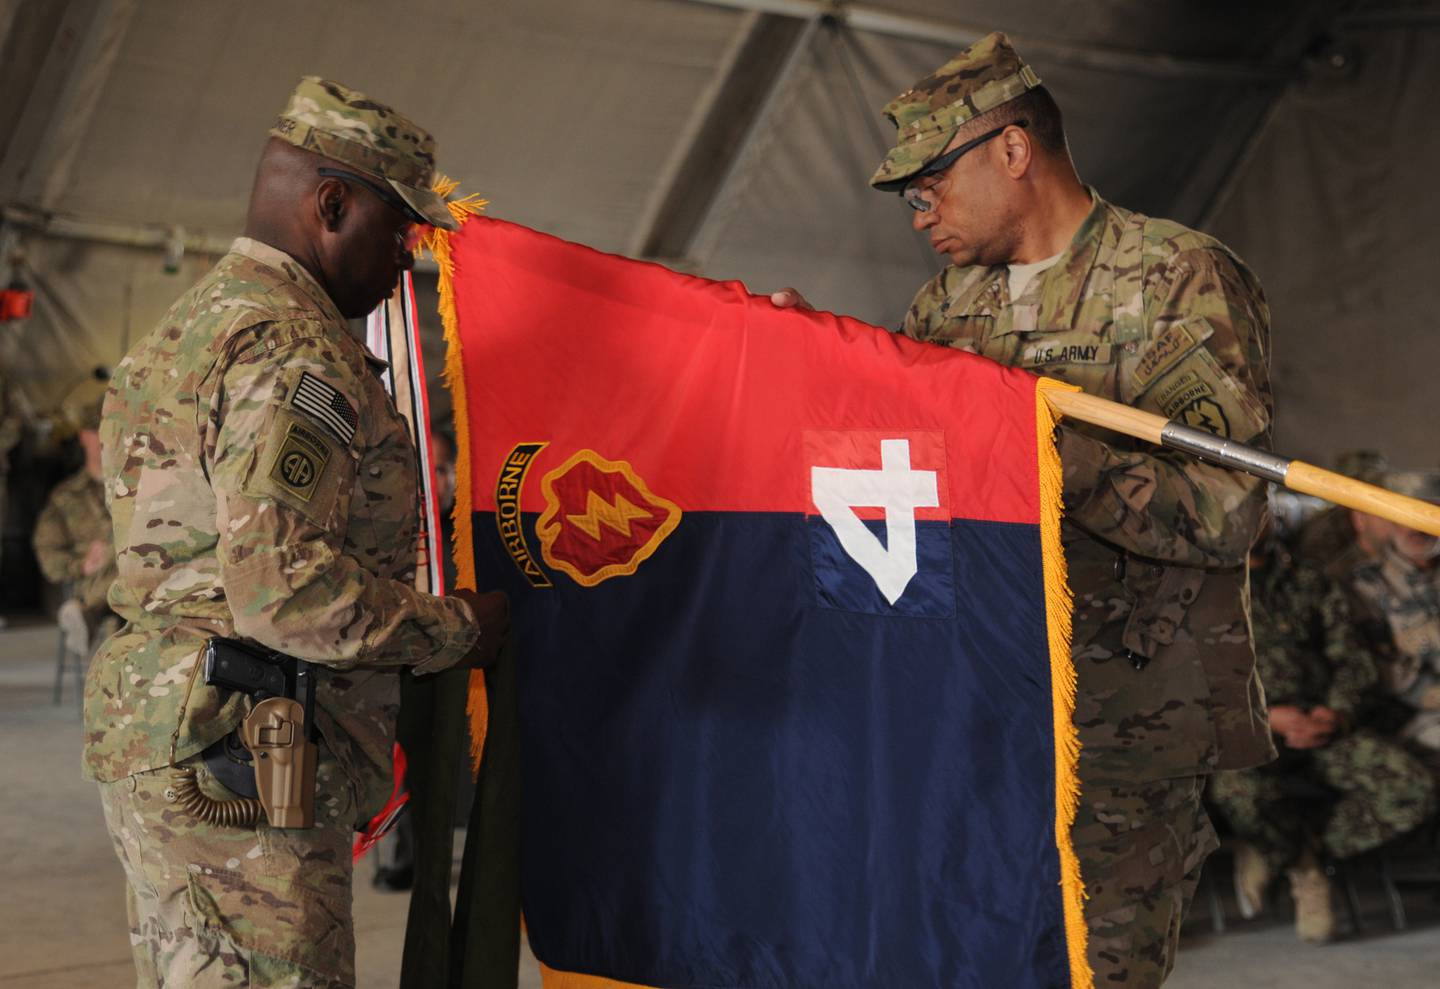 Army Col. Morris Goins, 4th Brigade Combat Team (Airborne), 25th Infantry Division, Task Force Spartan commander, and Army Command Sgt. Maj. Terry Gardner, command sergeant major of the 4th Brigade Combat Team (Airborne), 25th Infantry Division, Task Force Spartan, uncase their “colors” as the brigade assumes responsibility from TF Duke.